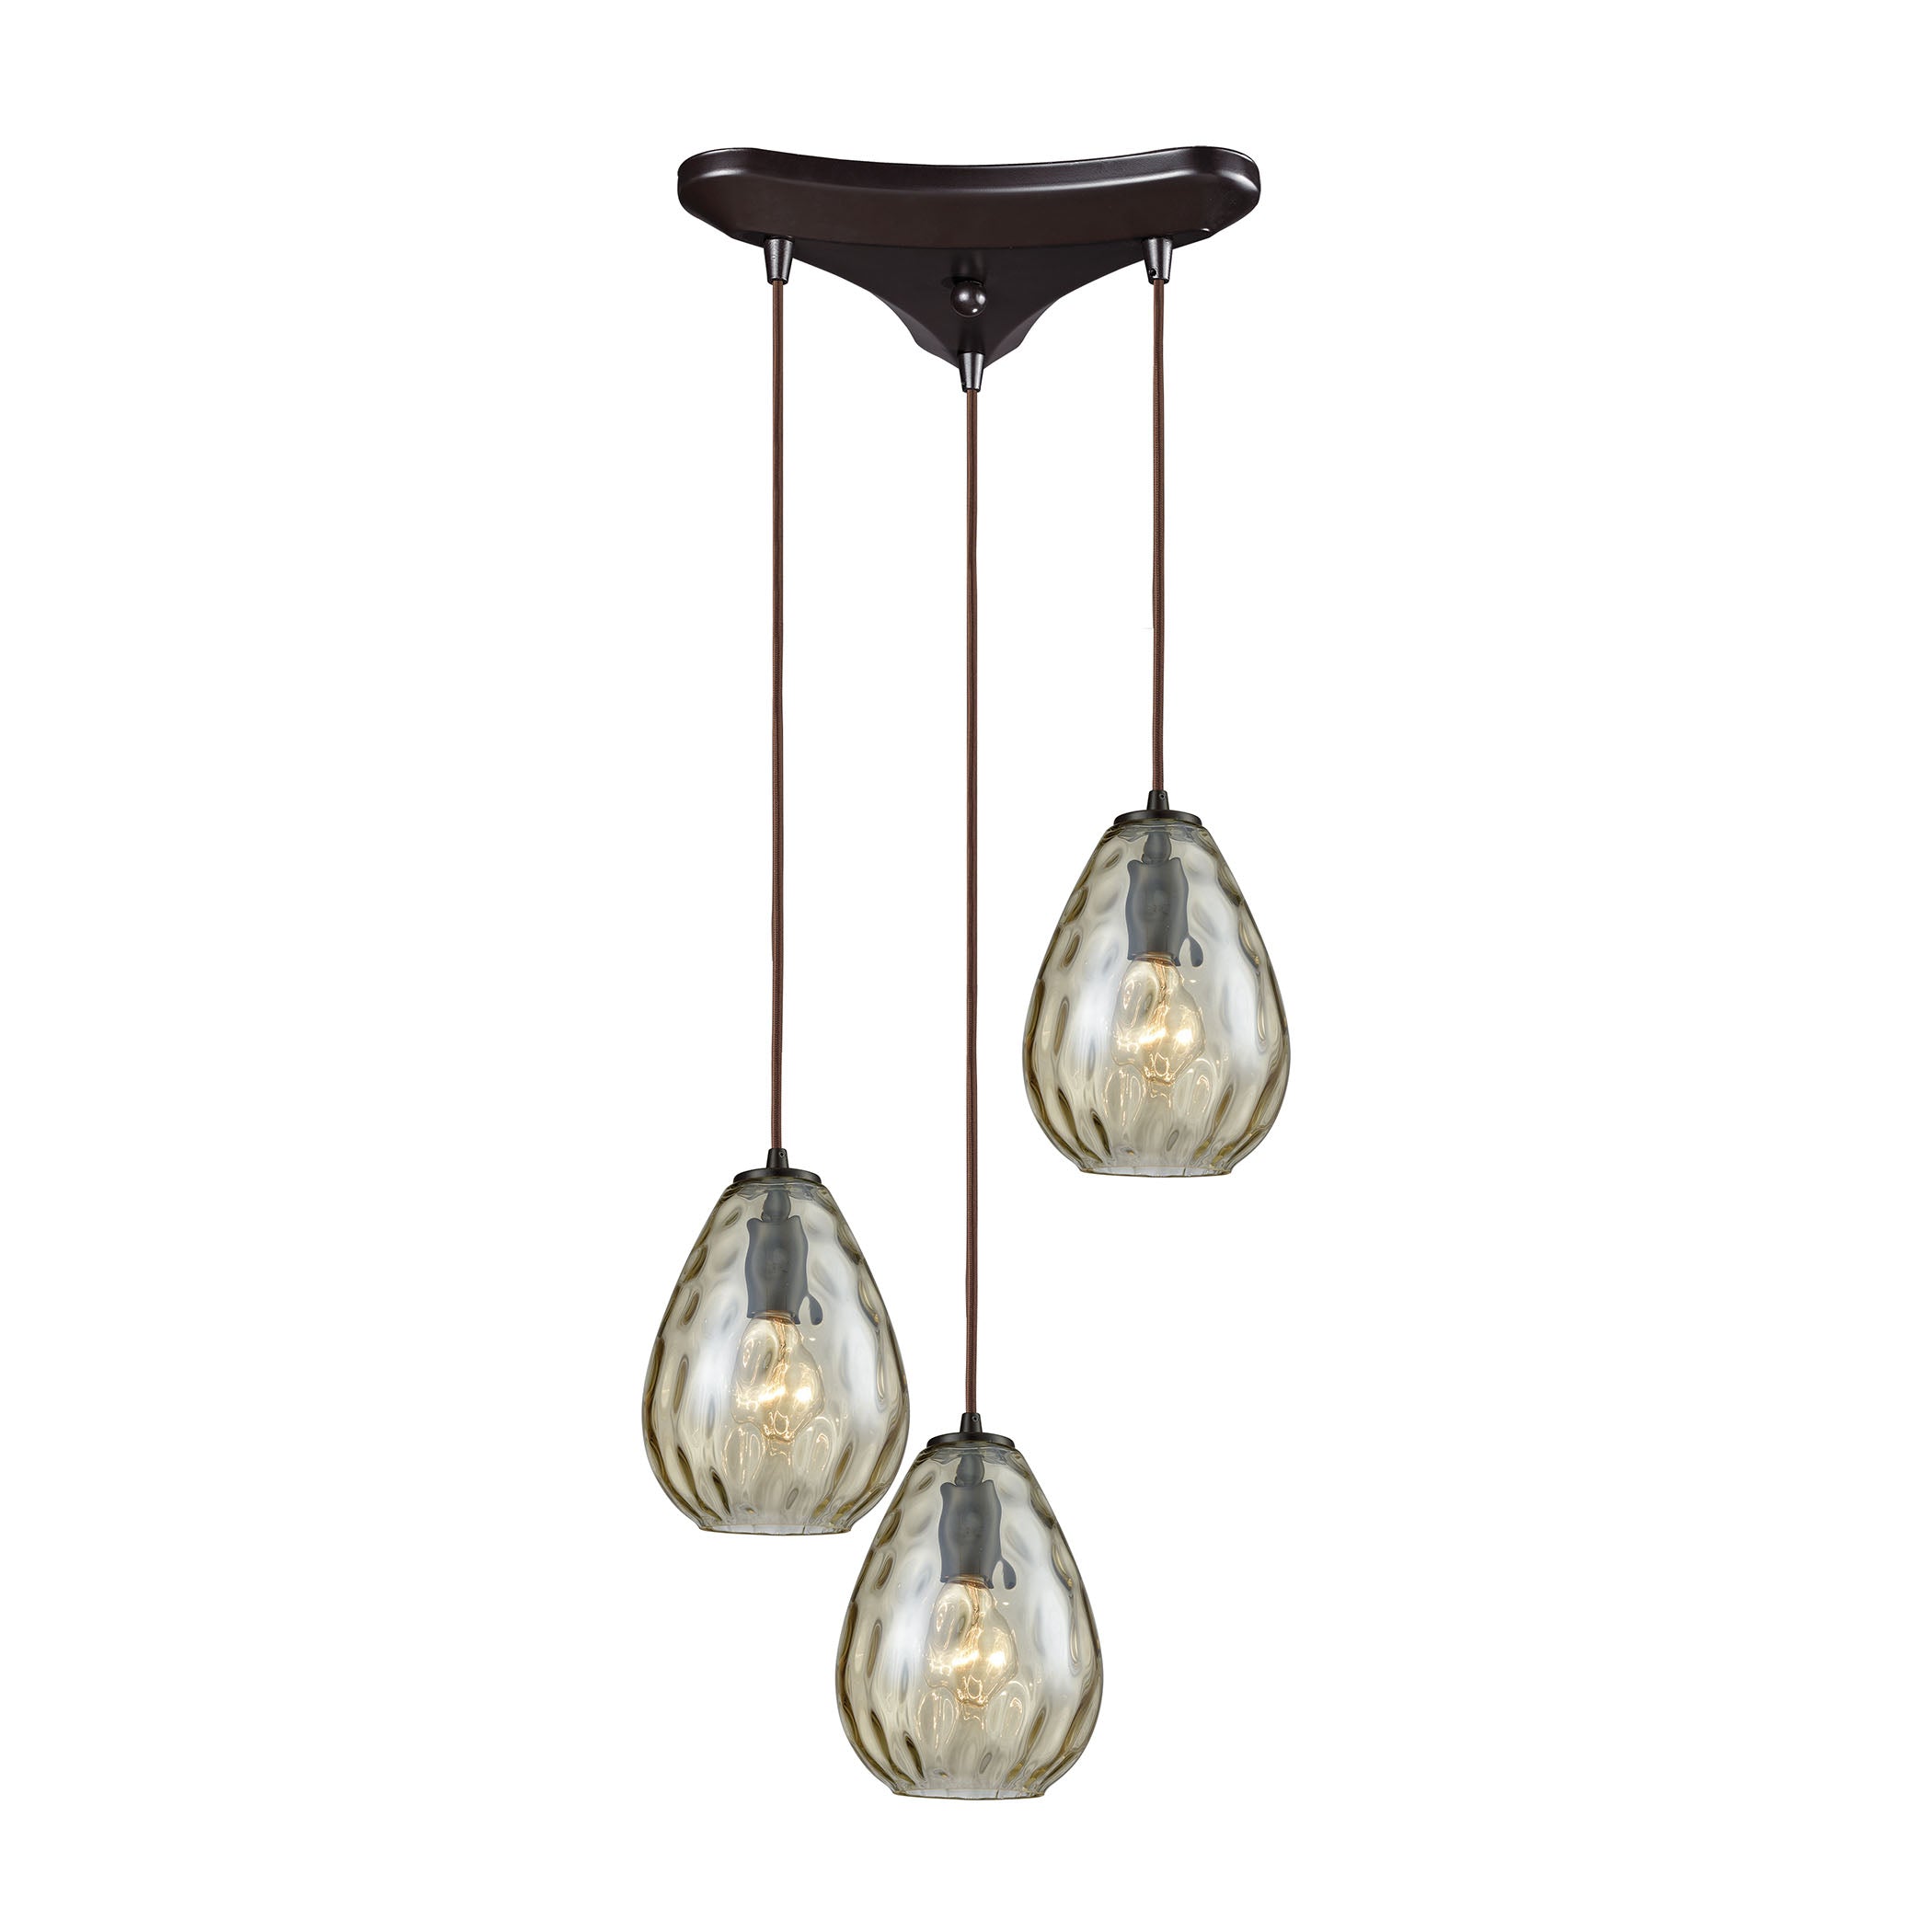 ELK Lighting 10780/3 Lagoon 3-Light Triangular Pendant Fixture in Oil Rubbed Bronze with Champagne-plated Water Glass